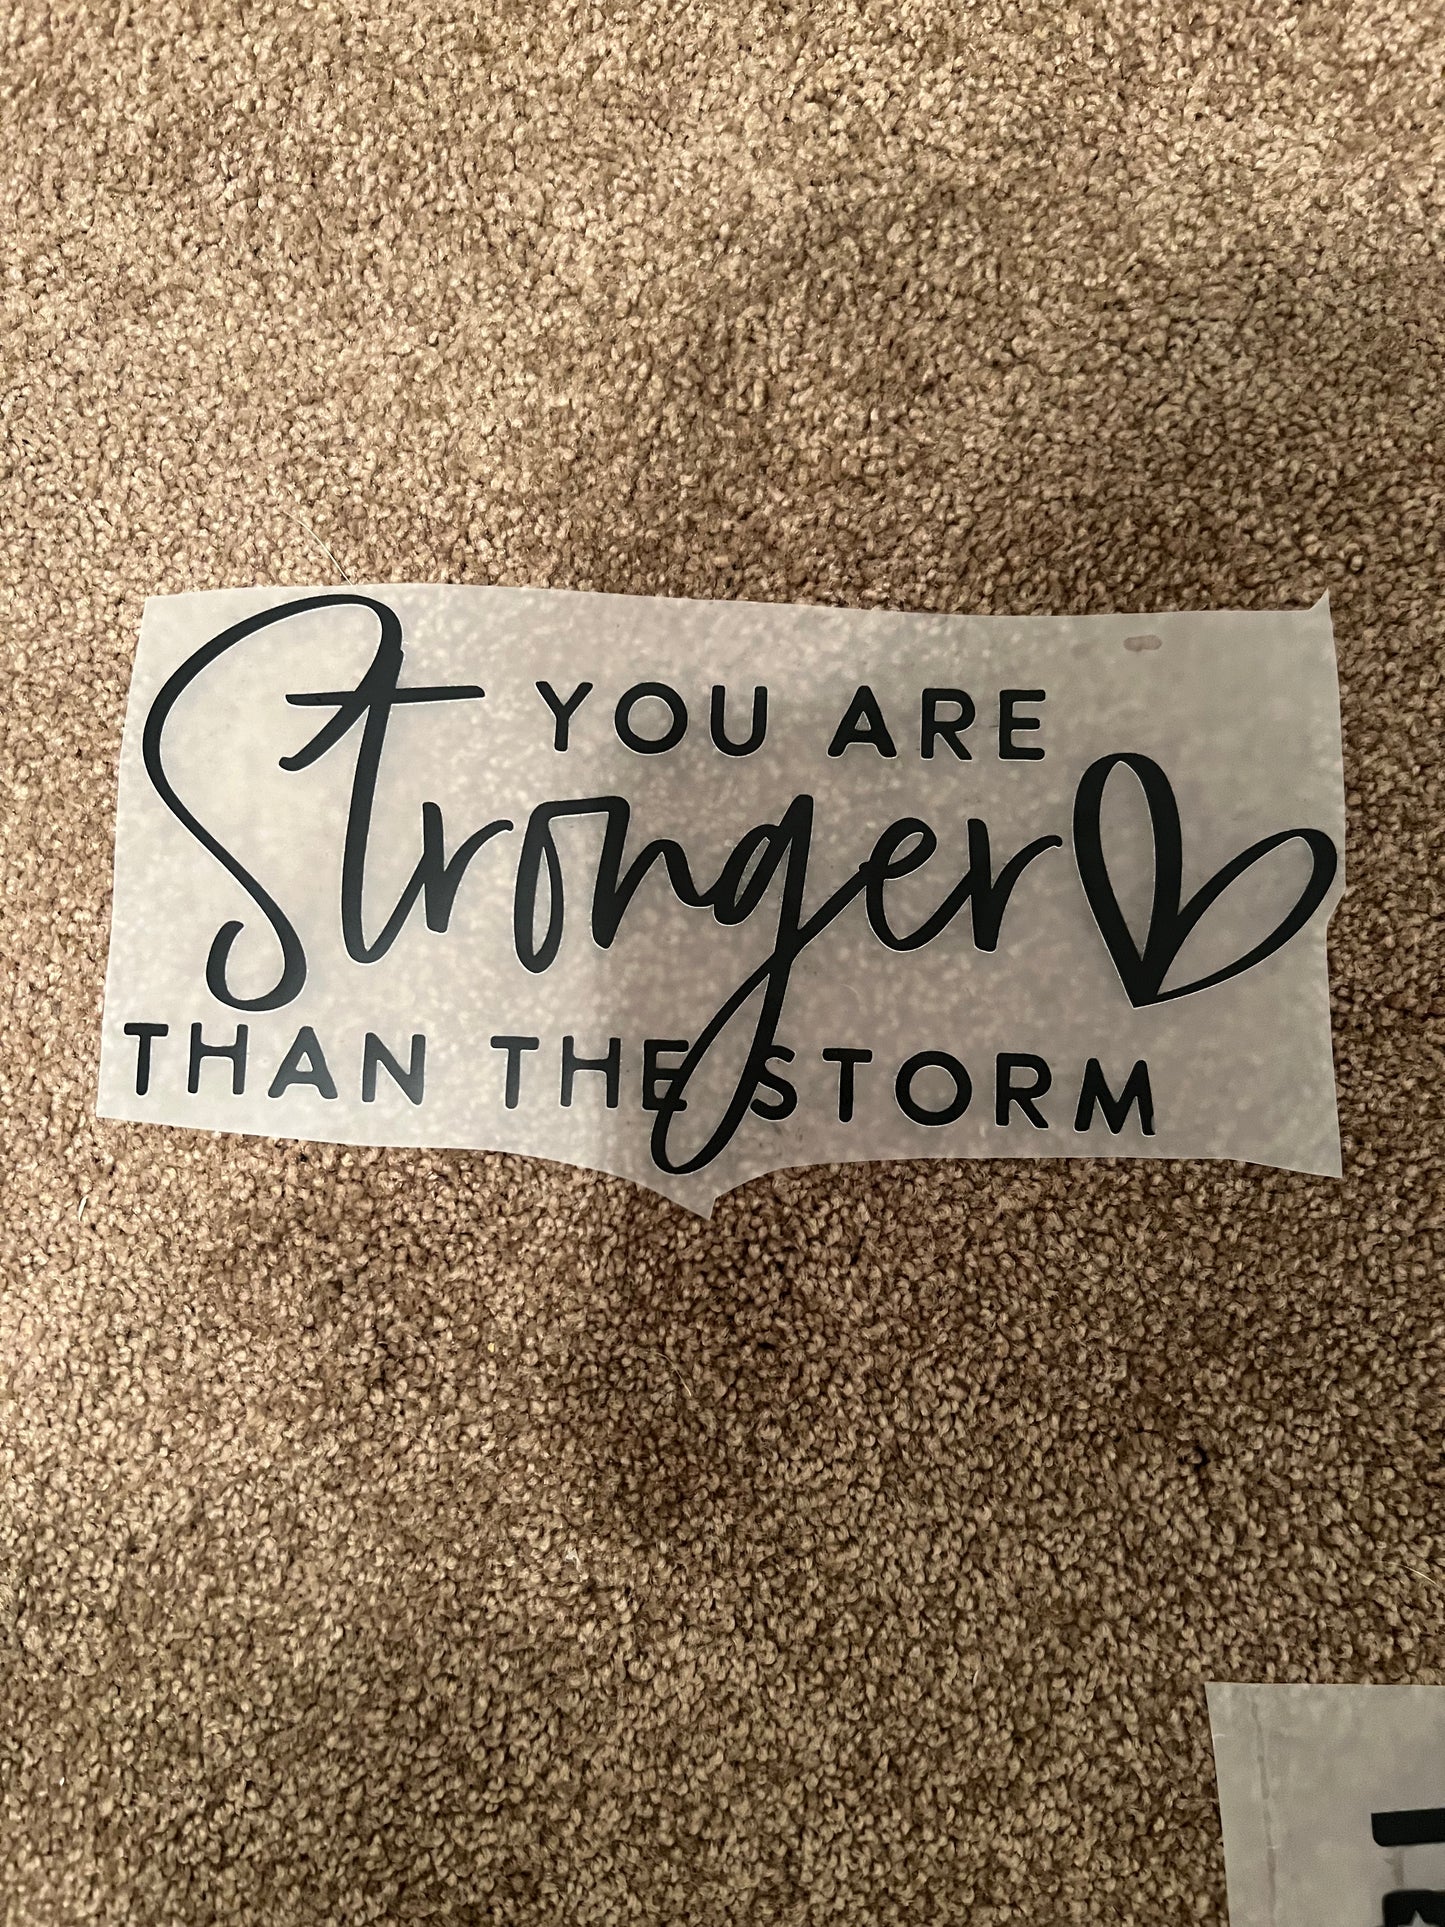 You are stronger than the storm